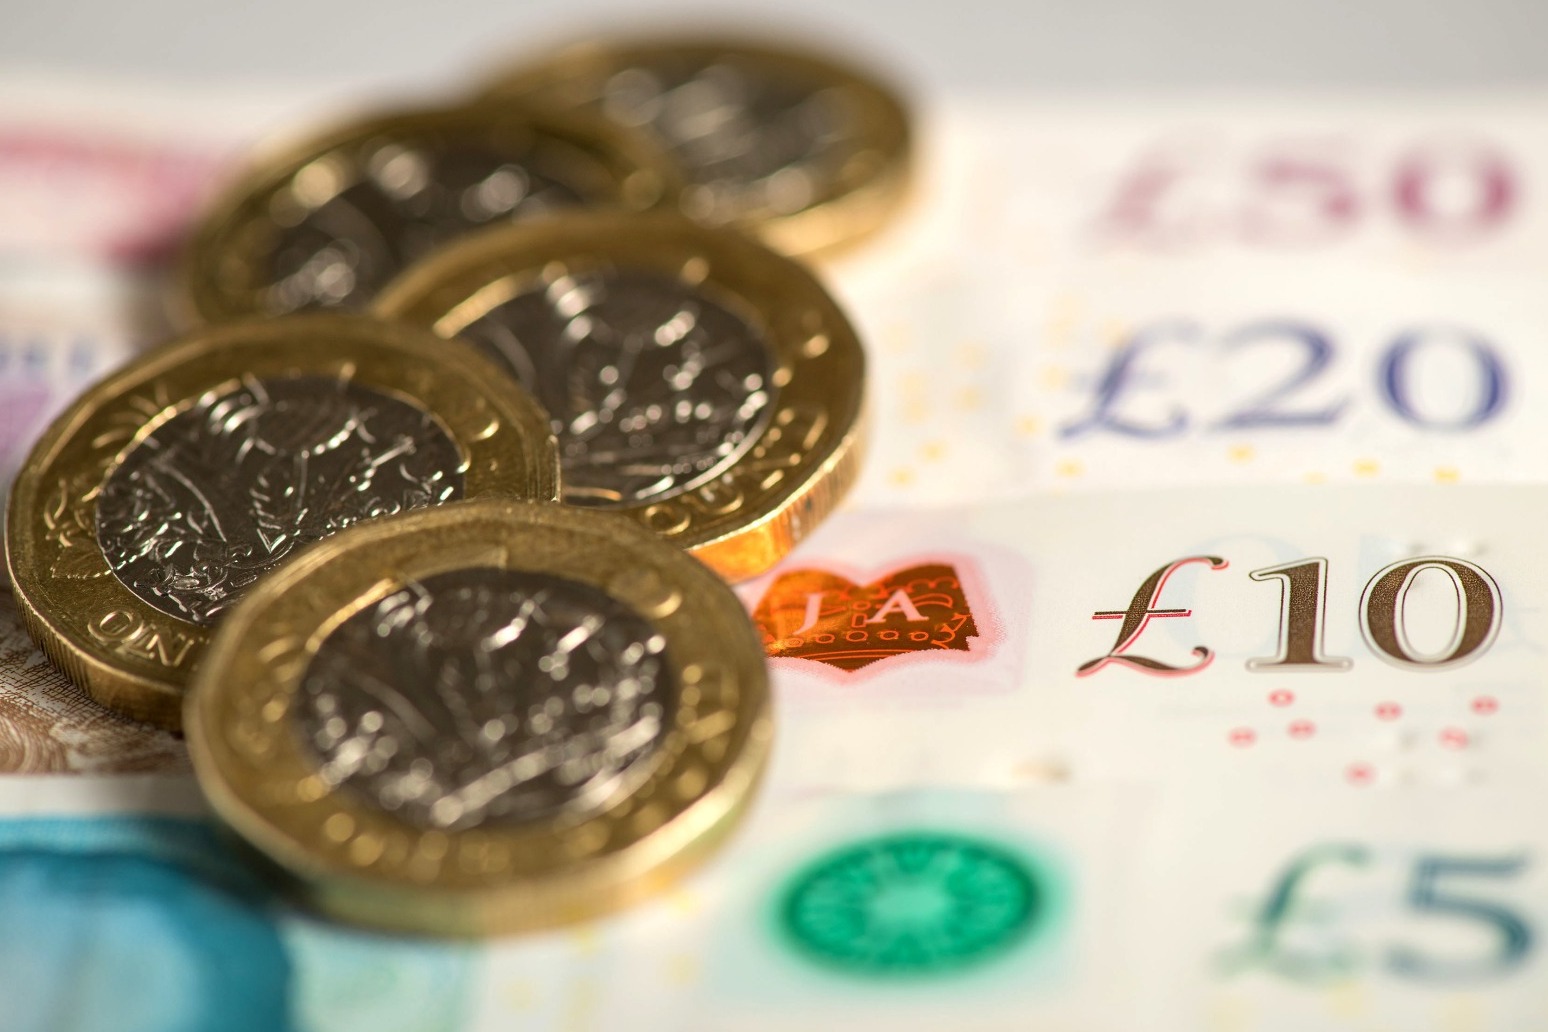 42% of people ‘expect to be financially worse off in next three months’ 